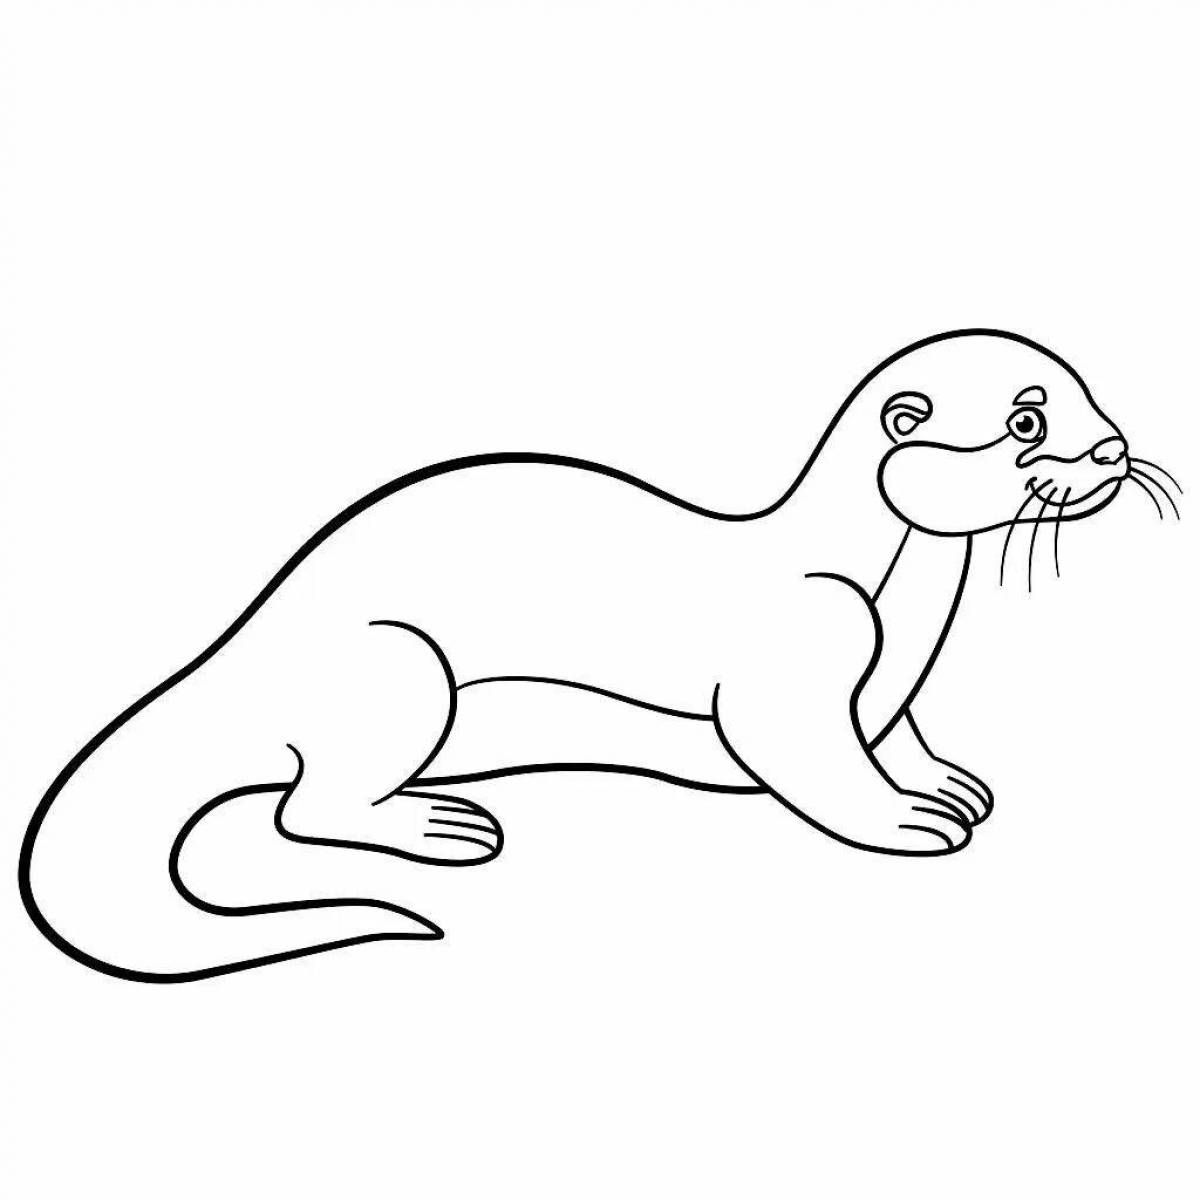 Mink sample coloring page